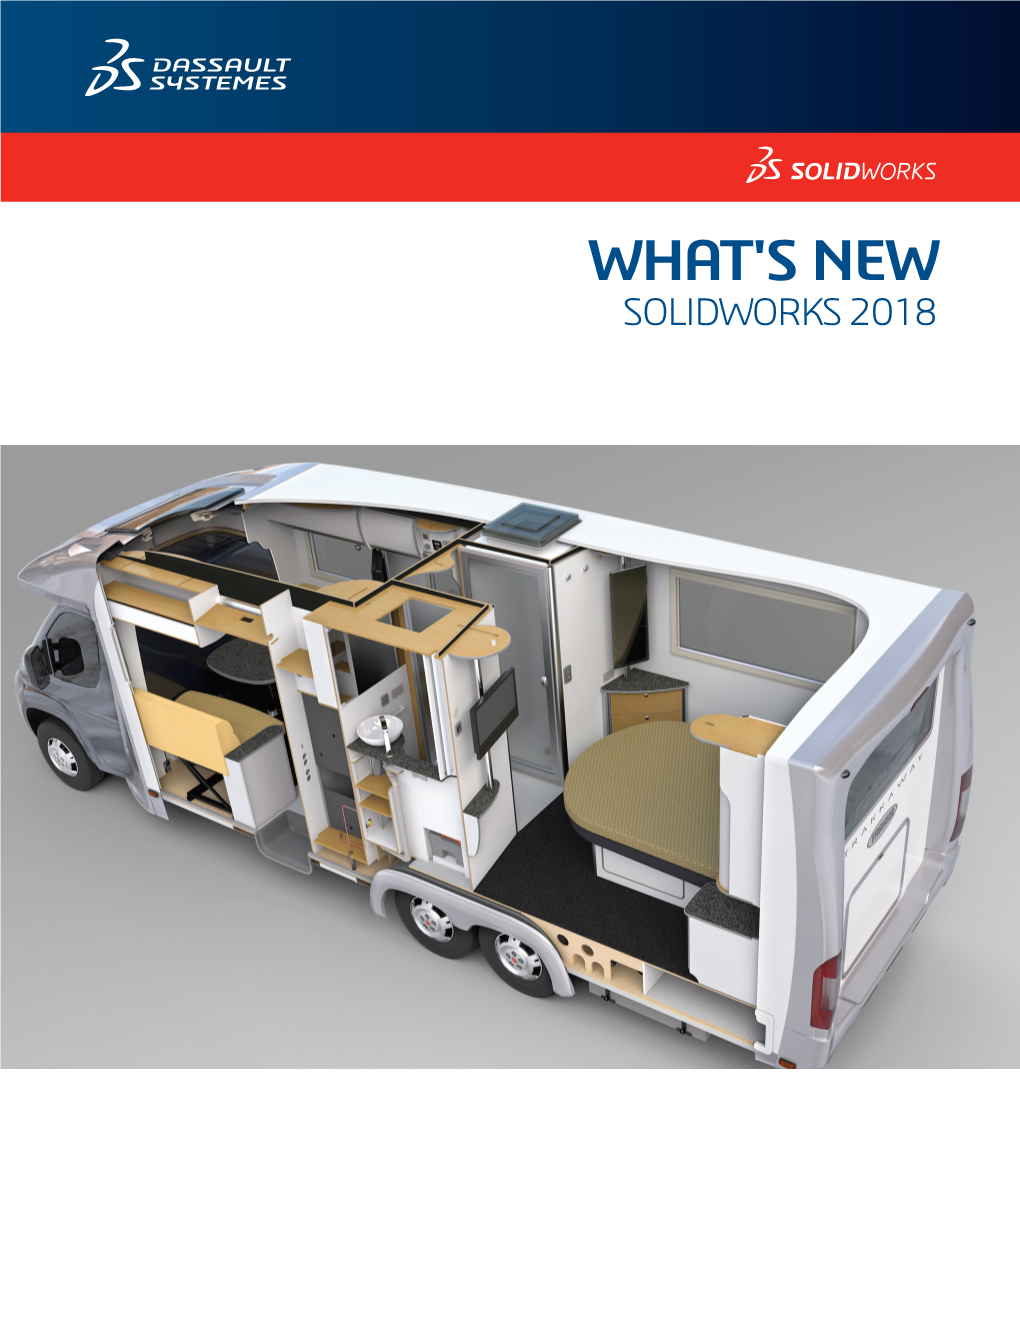 WHAT's NEW SOLIDWORKS 2018 Contents